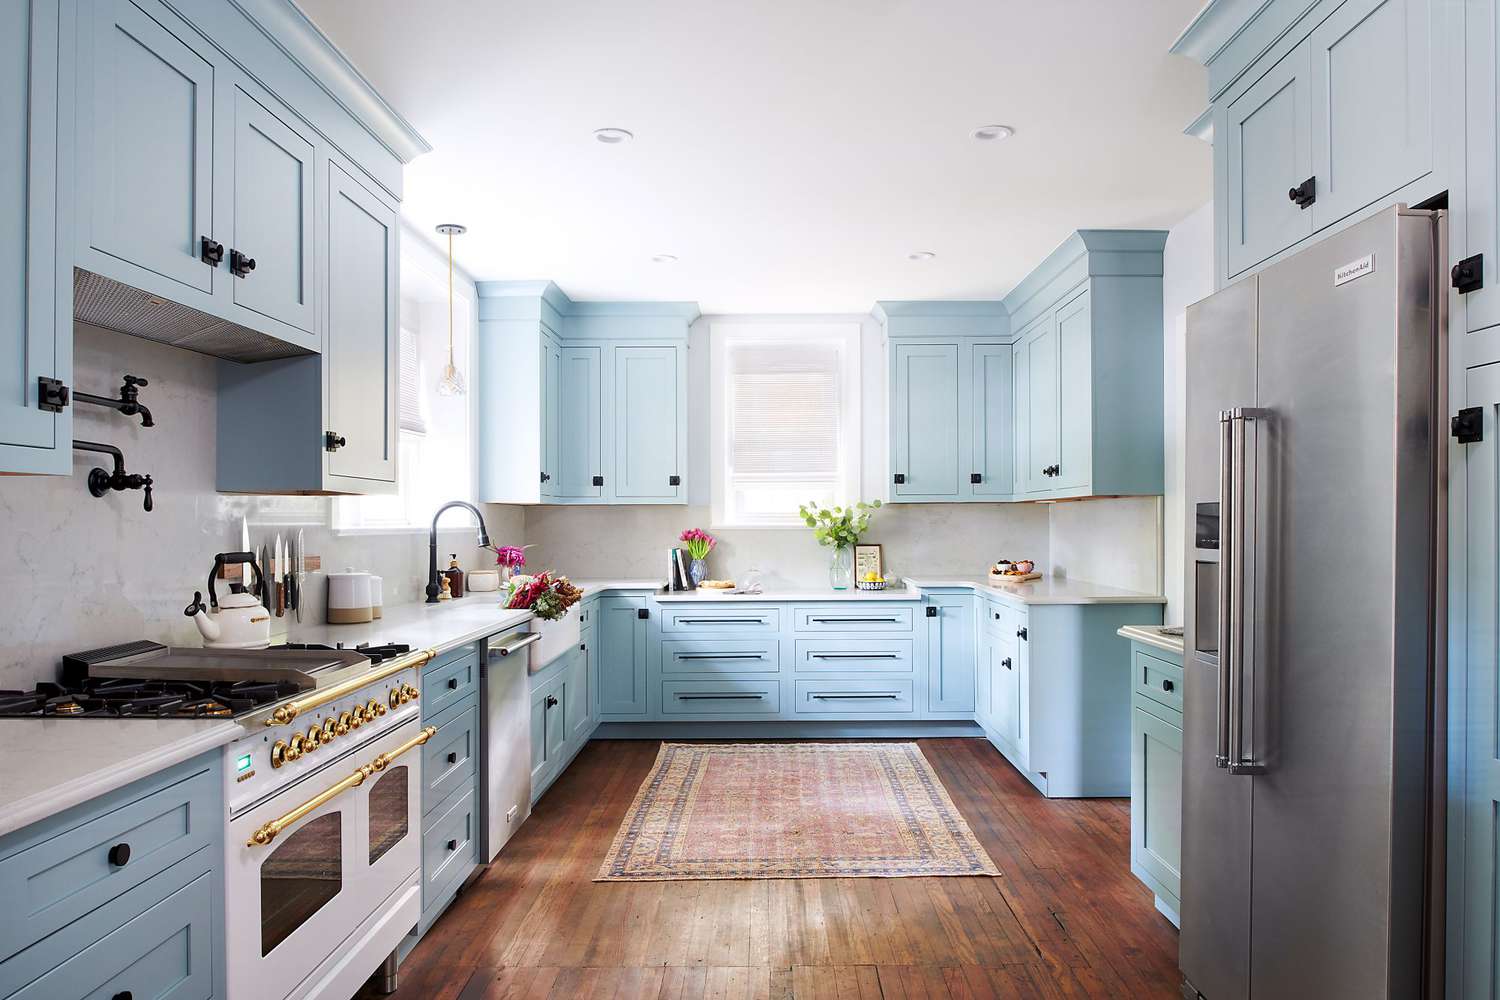 How To Pick Kitchen Paint Colors, How To Choose Your Kitchen Colors